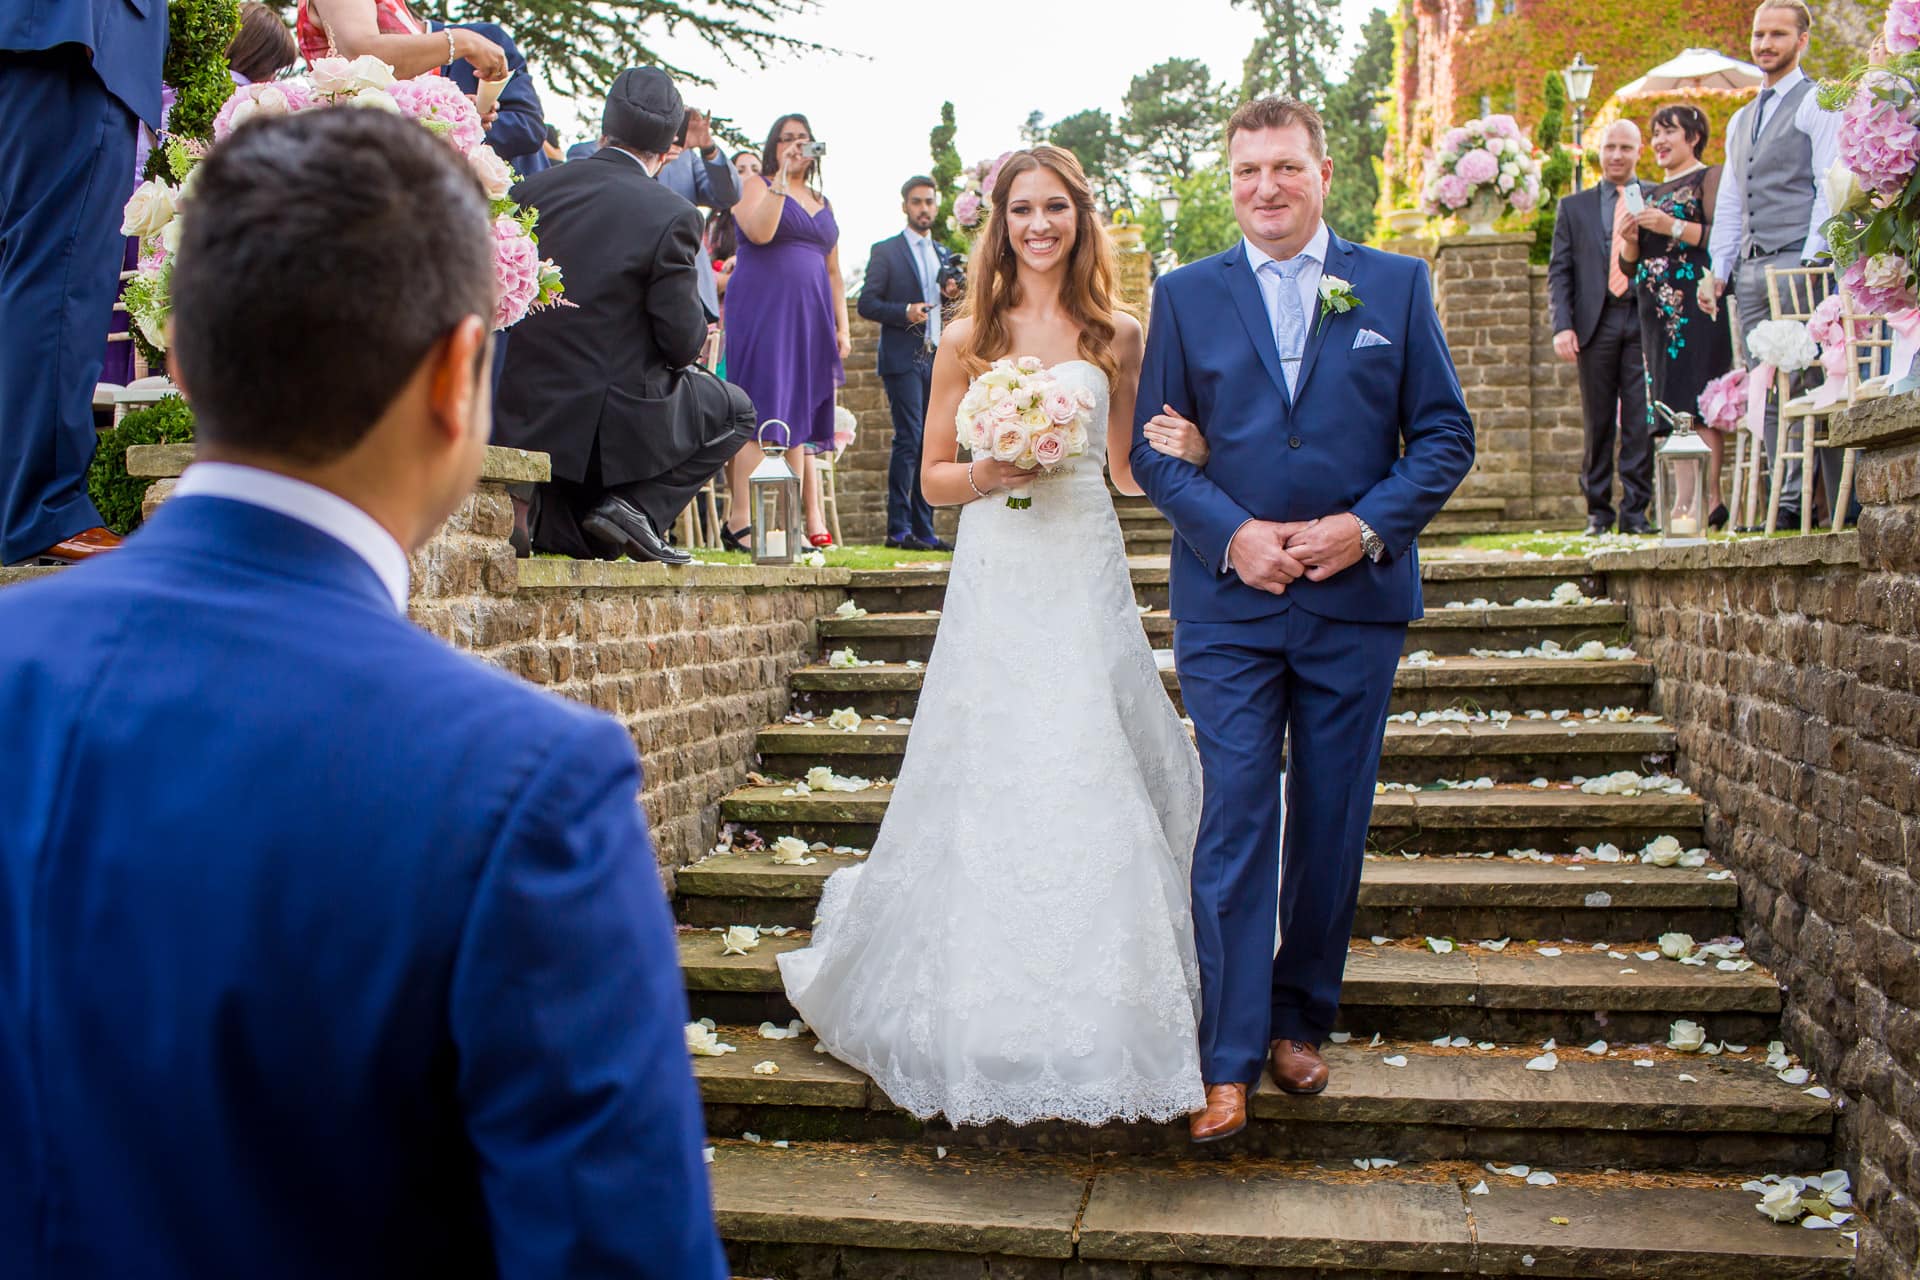 melinda arriving with her dad at Pennyhill Park